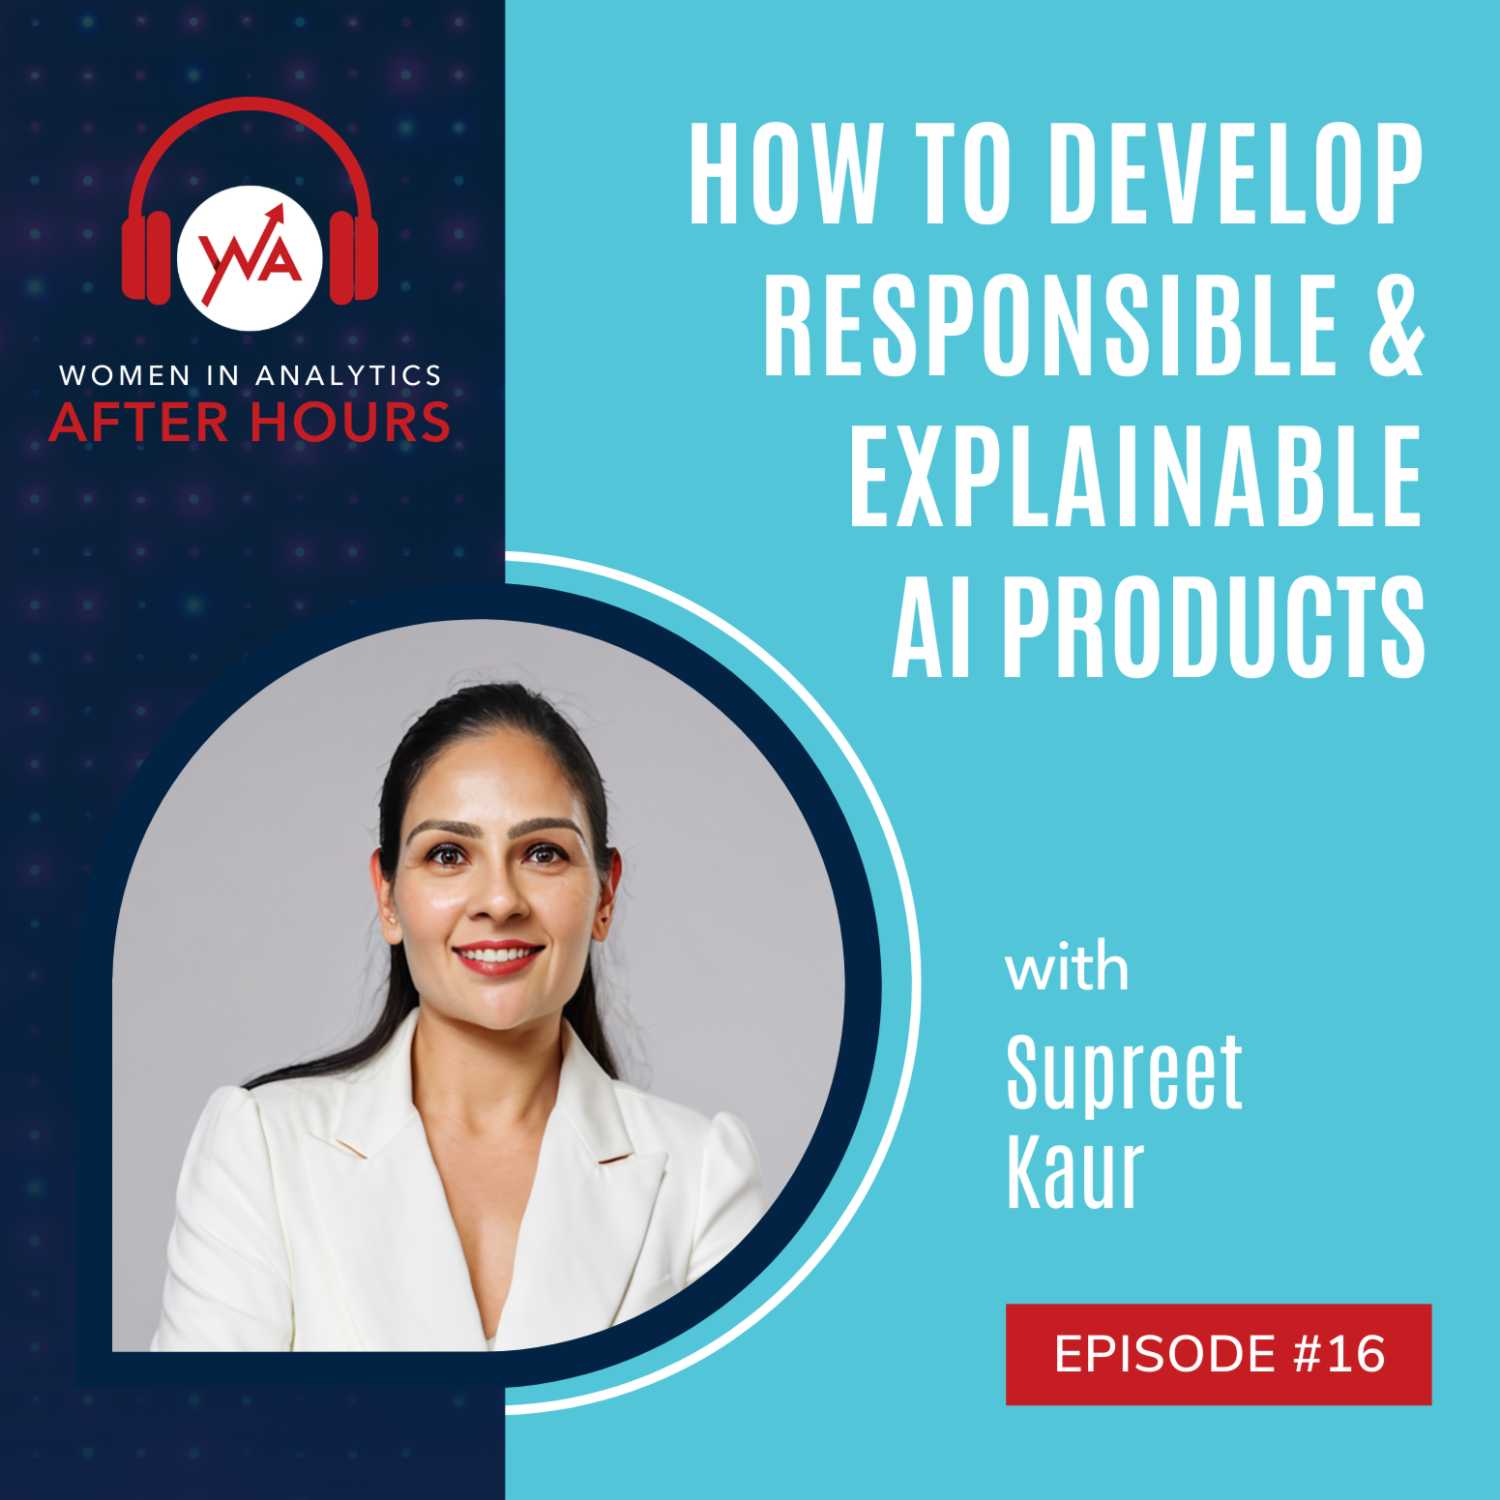 Episode 16: How to Develop Responsible and Explainable AI Products with Supreet Kaur